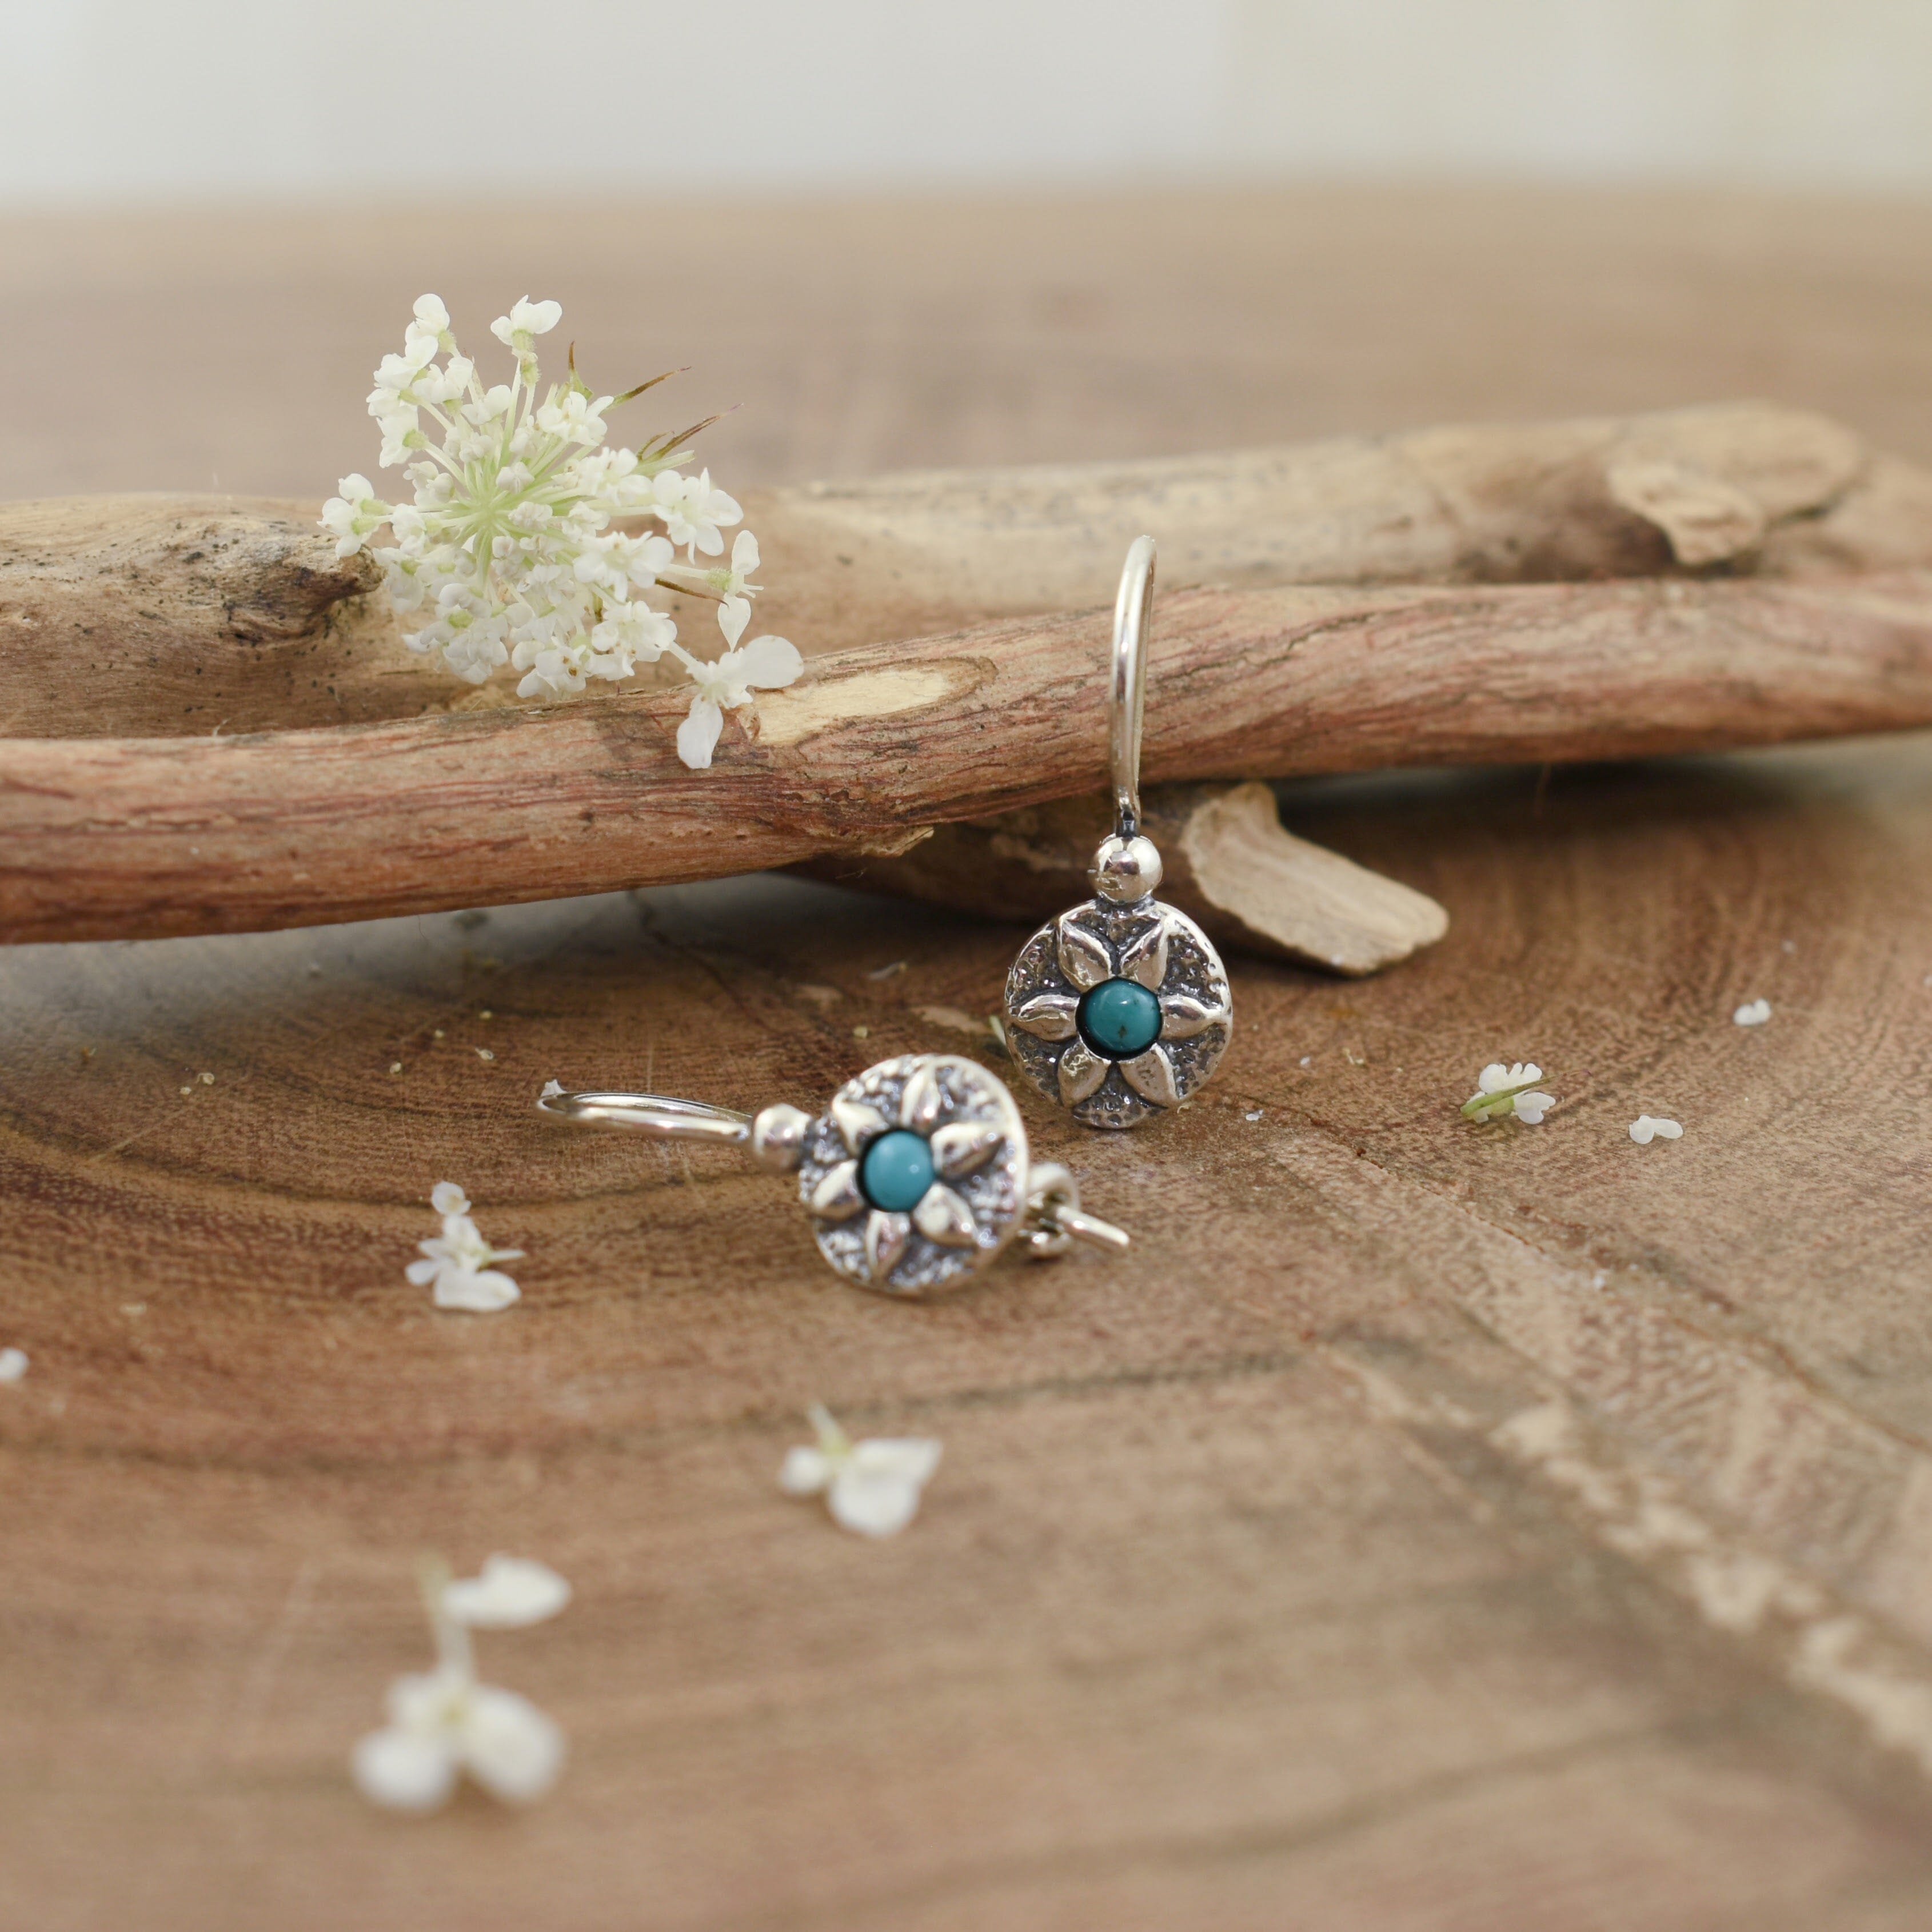 .925 sterling silver and turquoise flower earrings